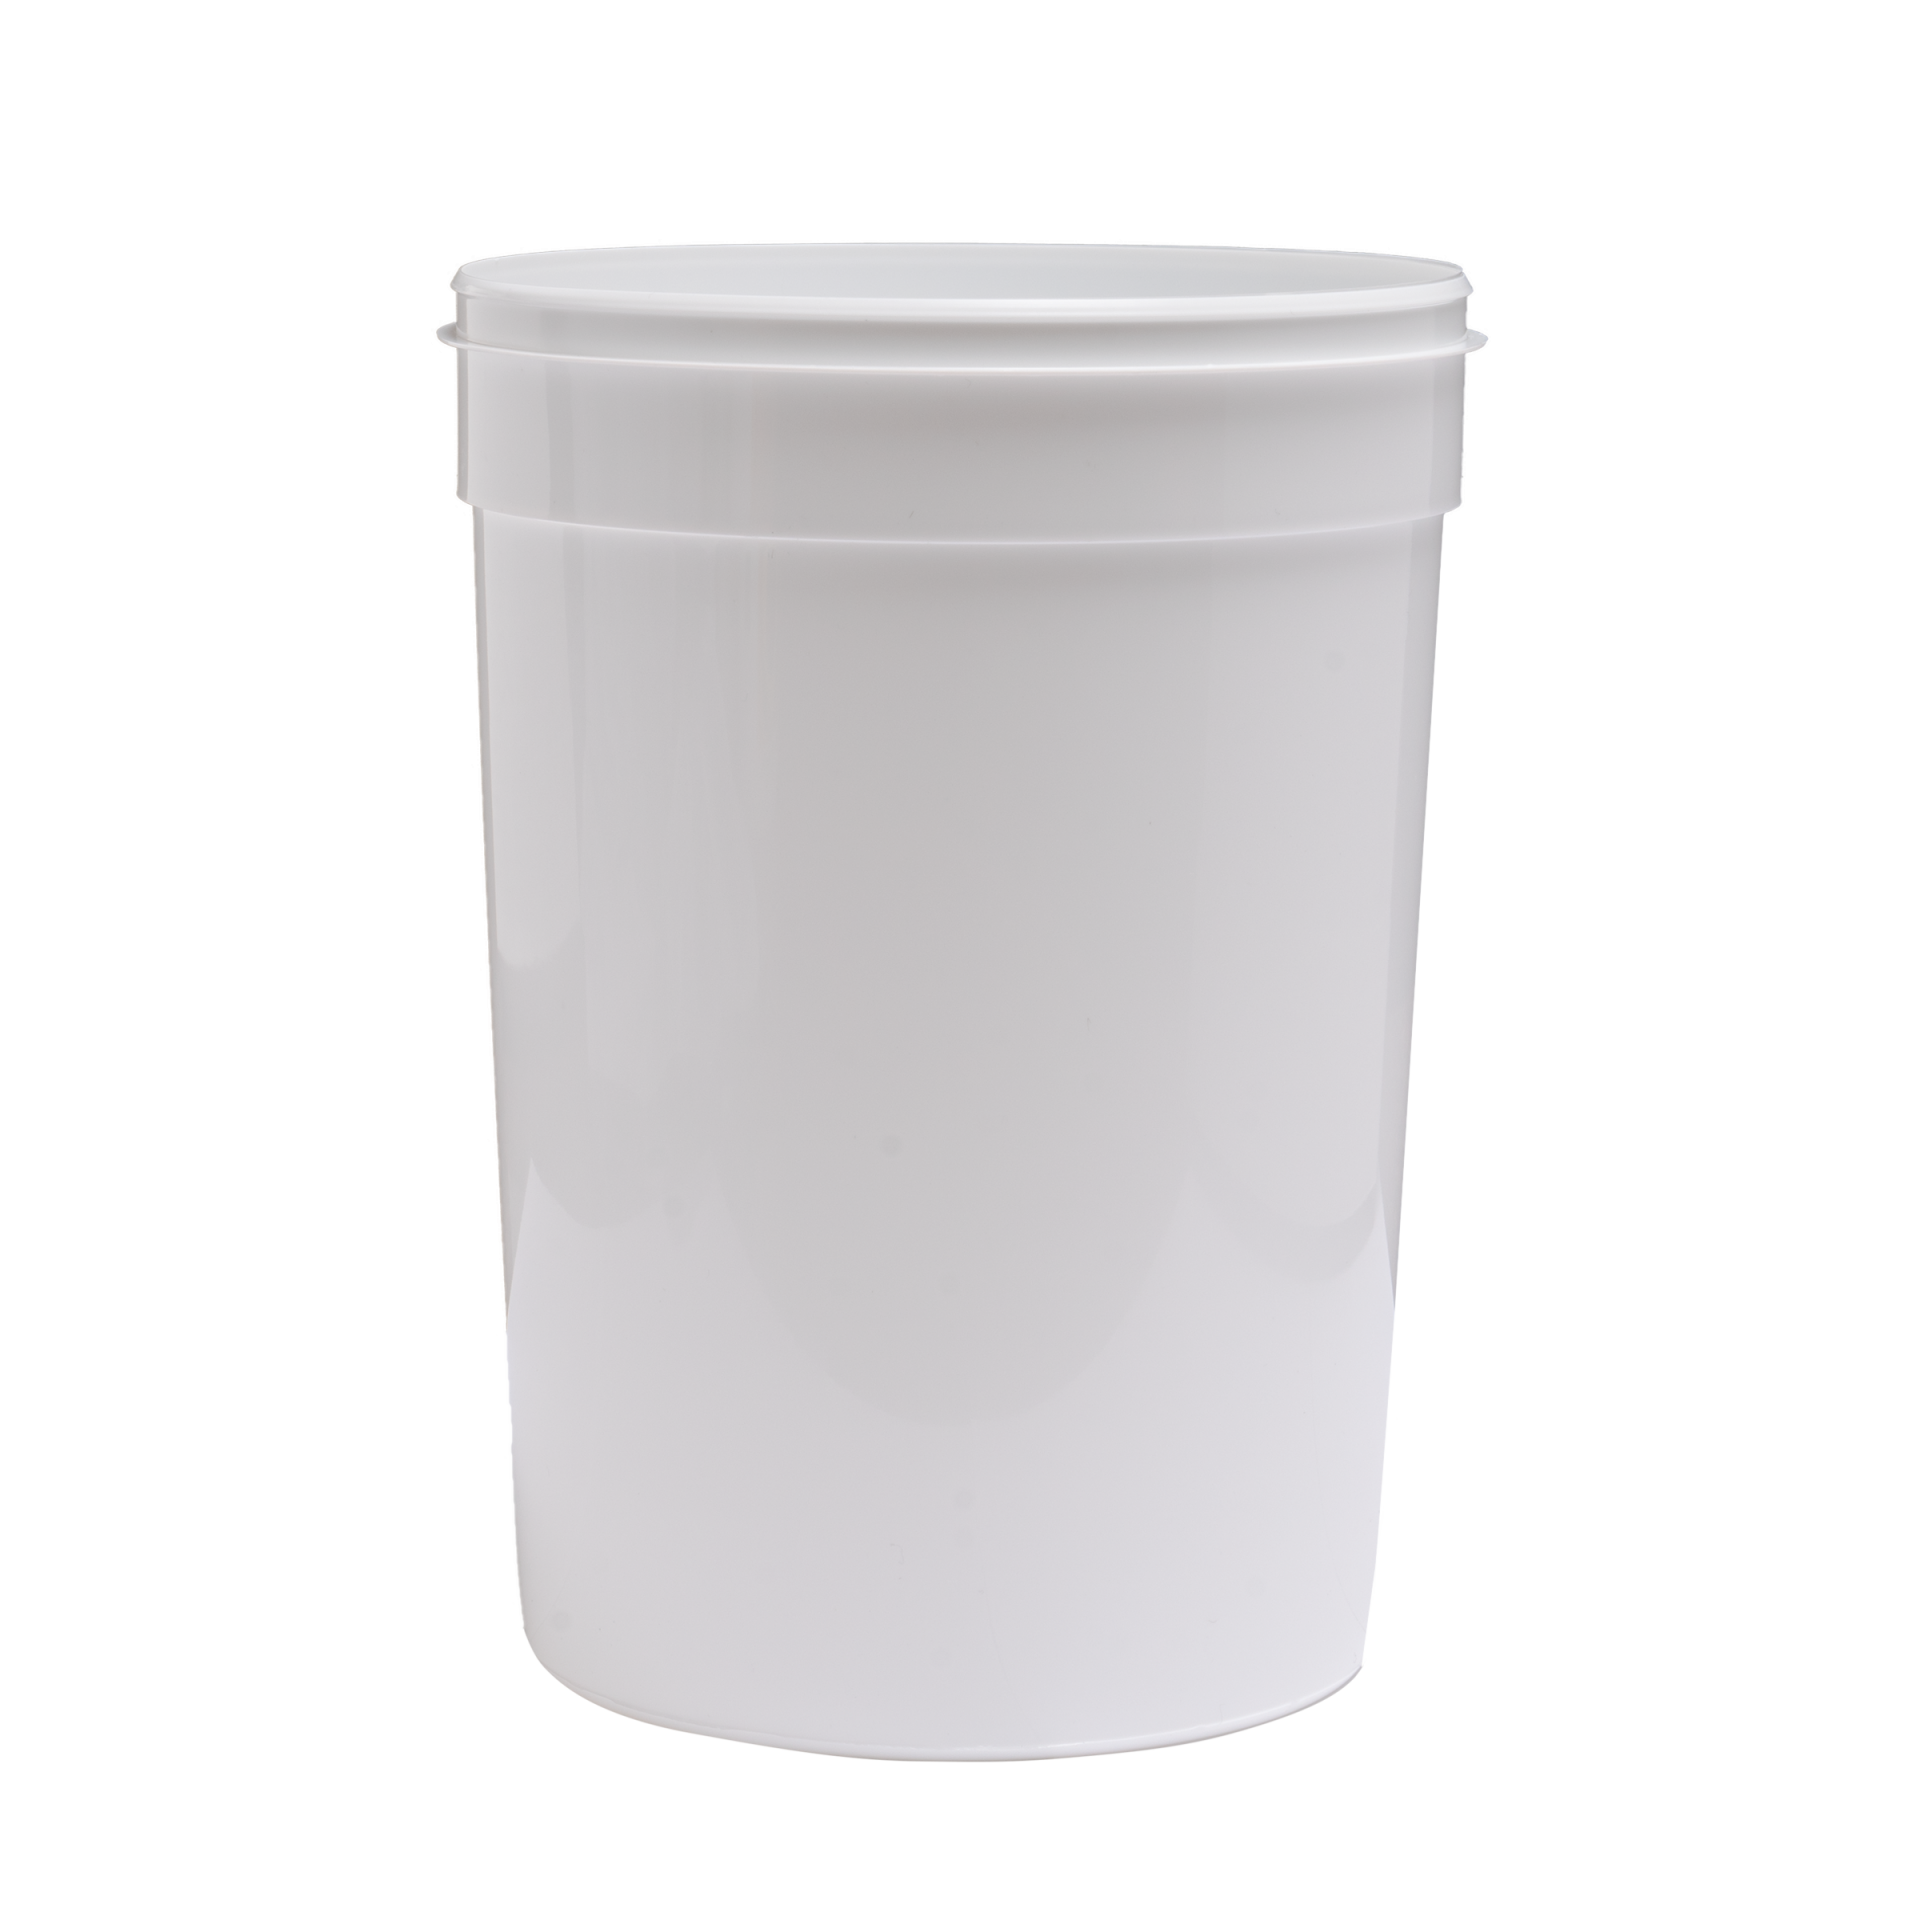 https://www.containersupplycompany.com/wp-content/uploads/2020/03/6-1_2-tub-1920x1920.png